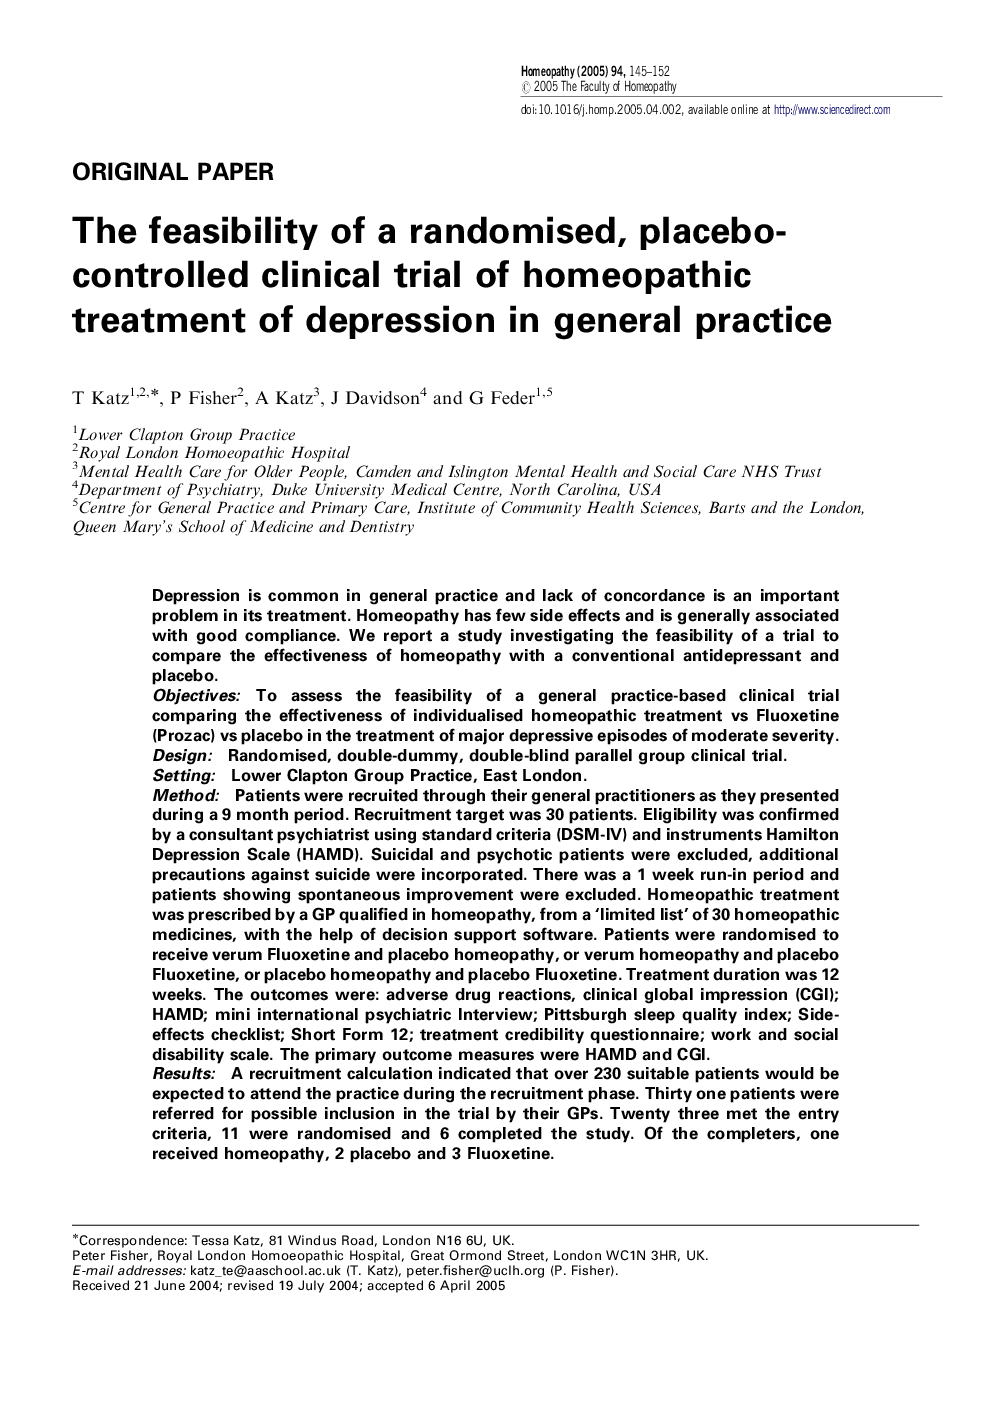 The feasibility of a randomised, placebo-controlled clinical trial of homeopathic treatment of depression in general practice